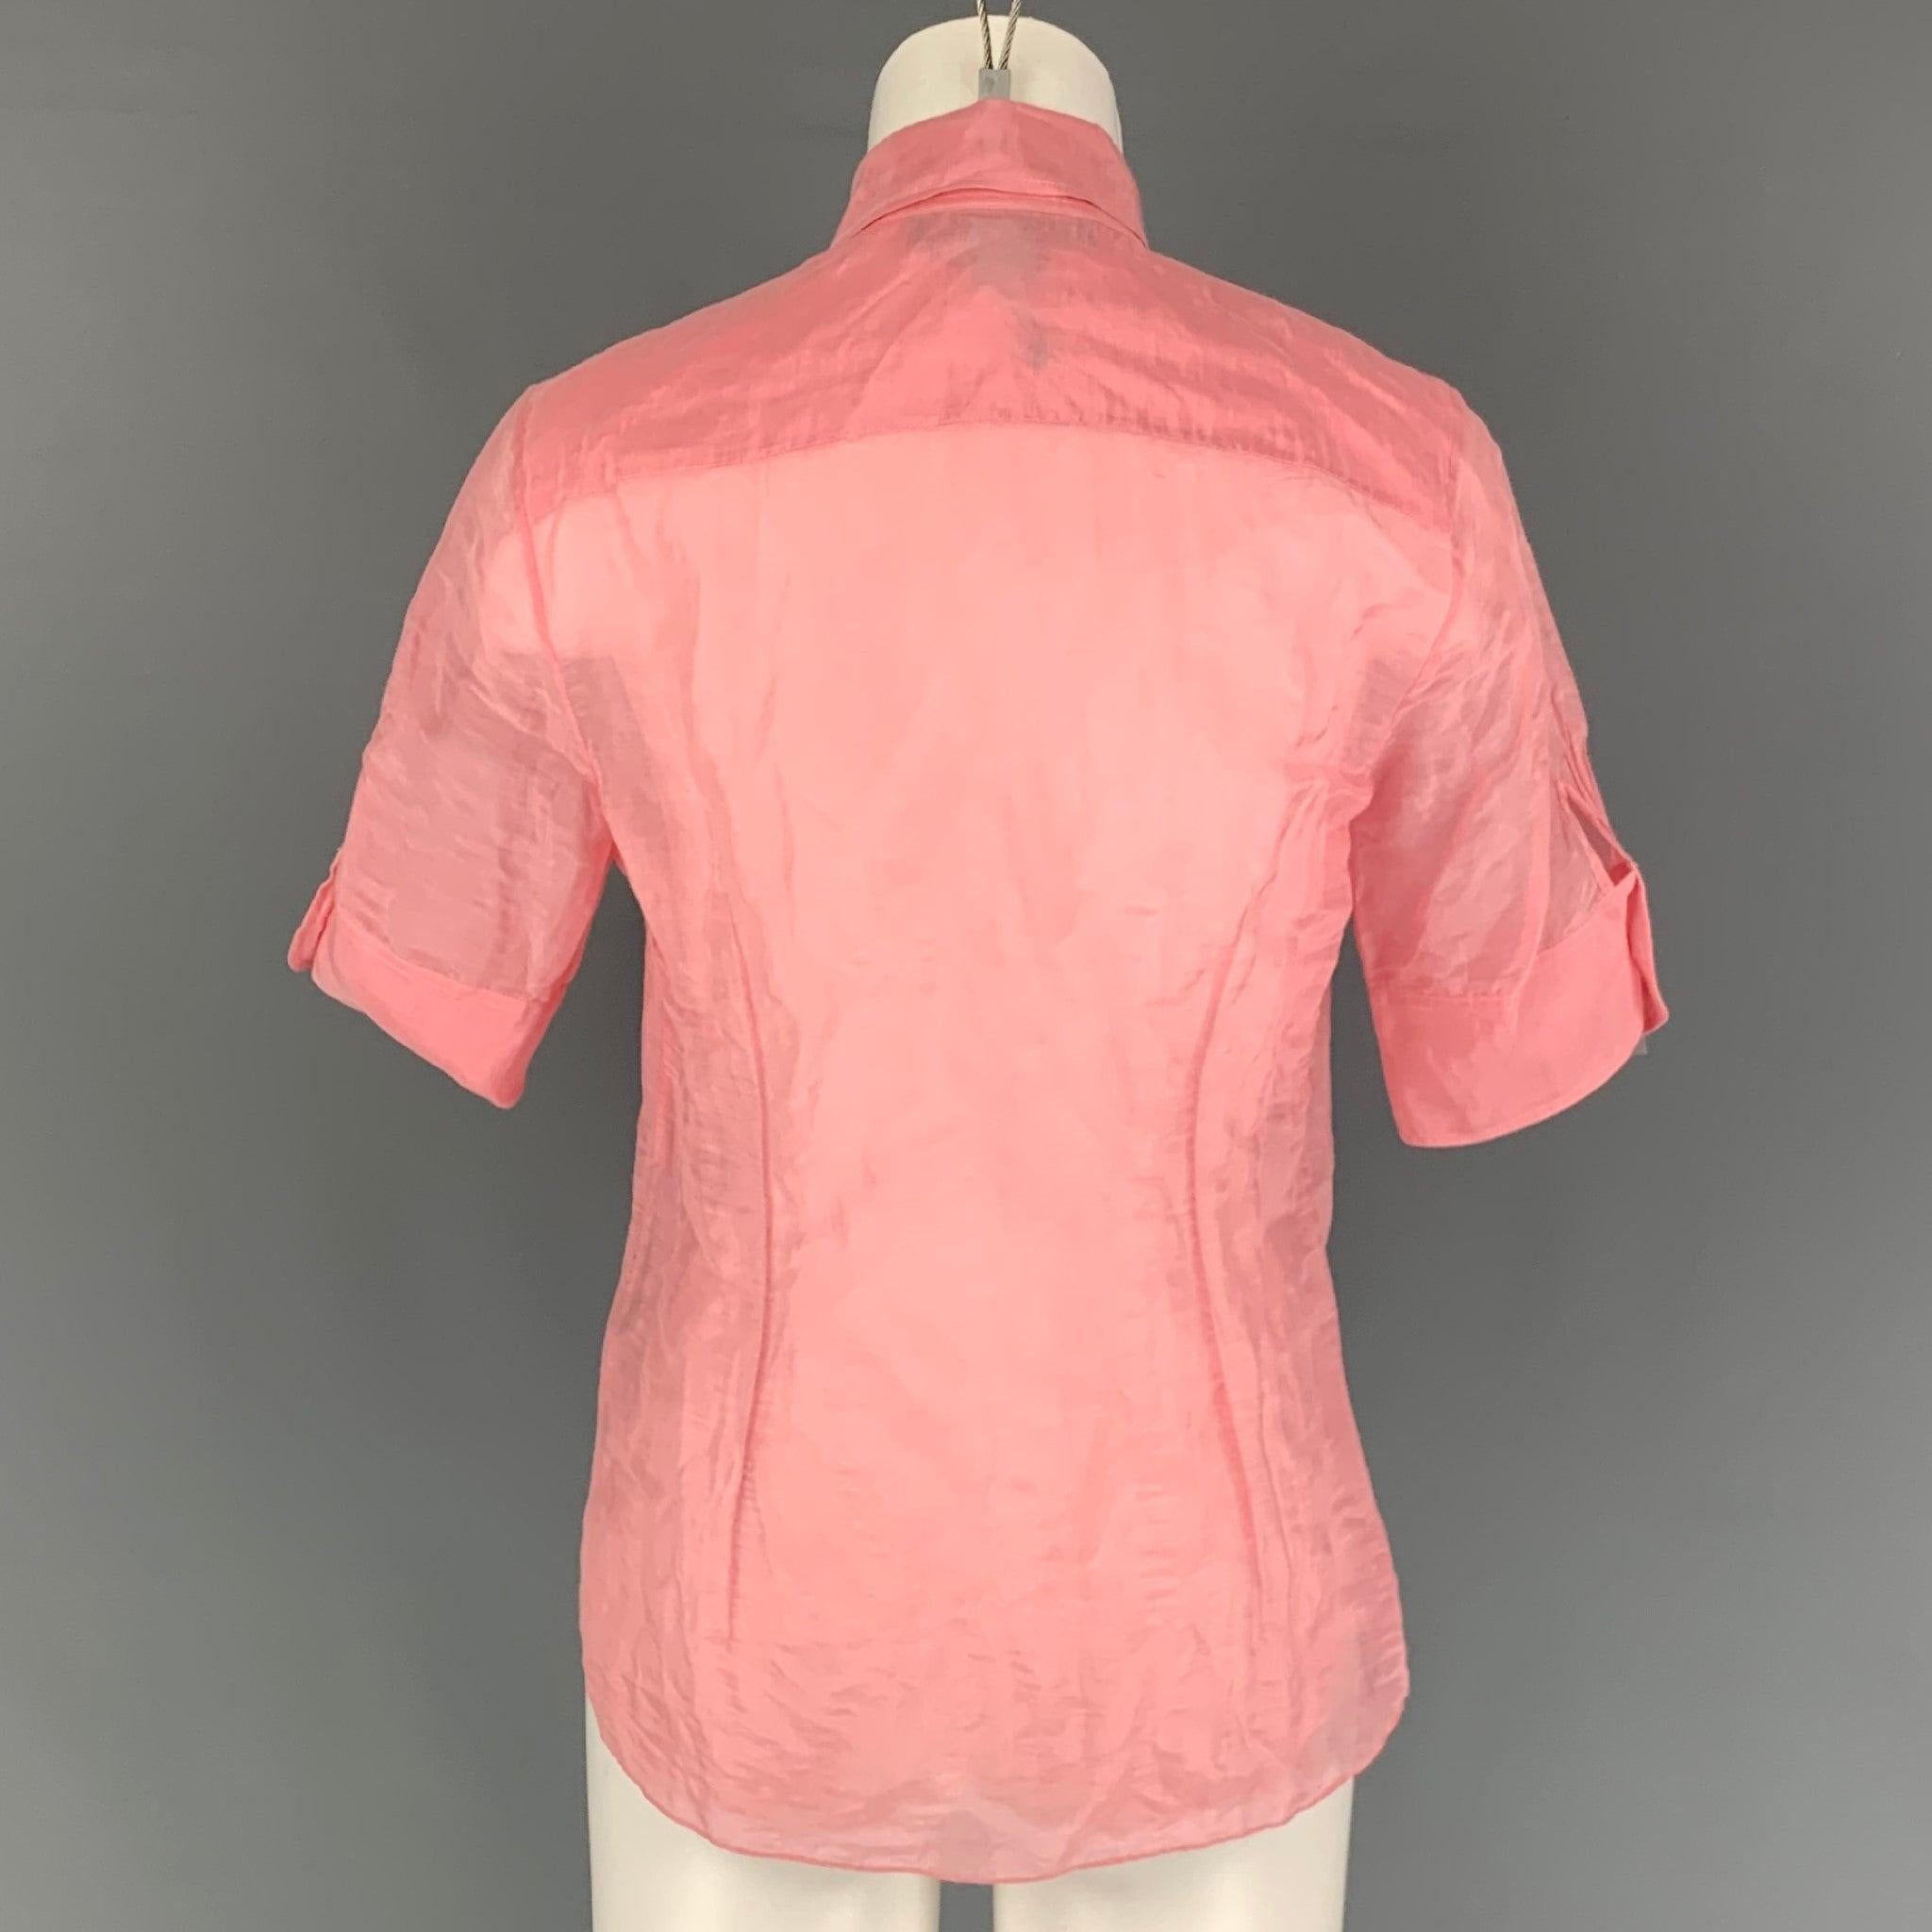 RALPH LAUREN Black Label Size 8 Pink Ruffled Short Sleeve Blouse In Good Condition For Sale In San Francisco, CA